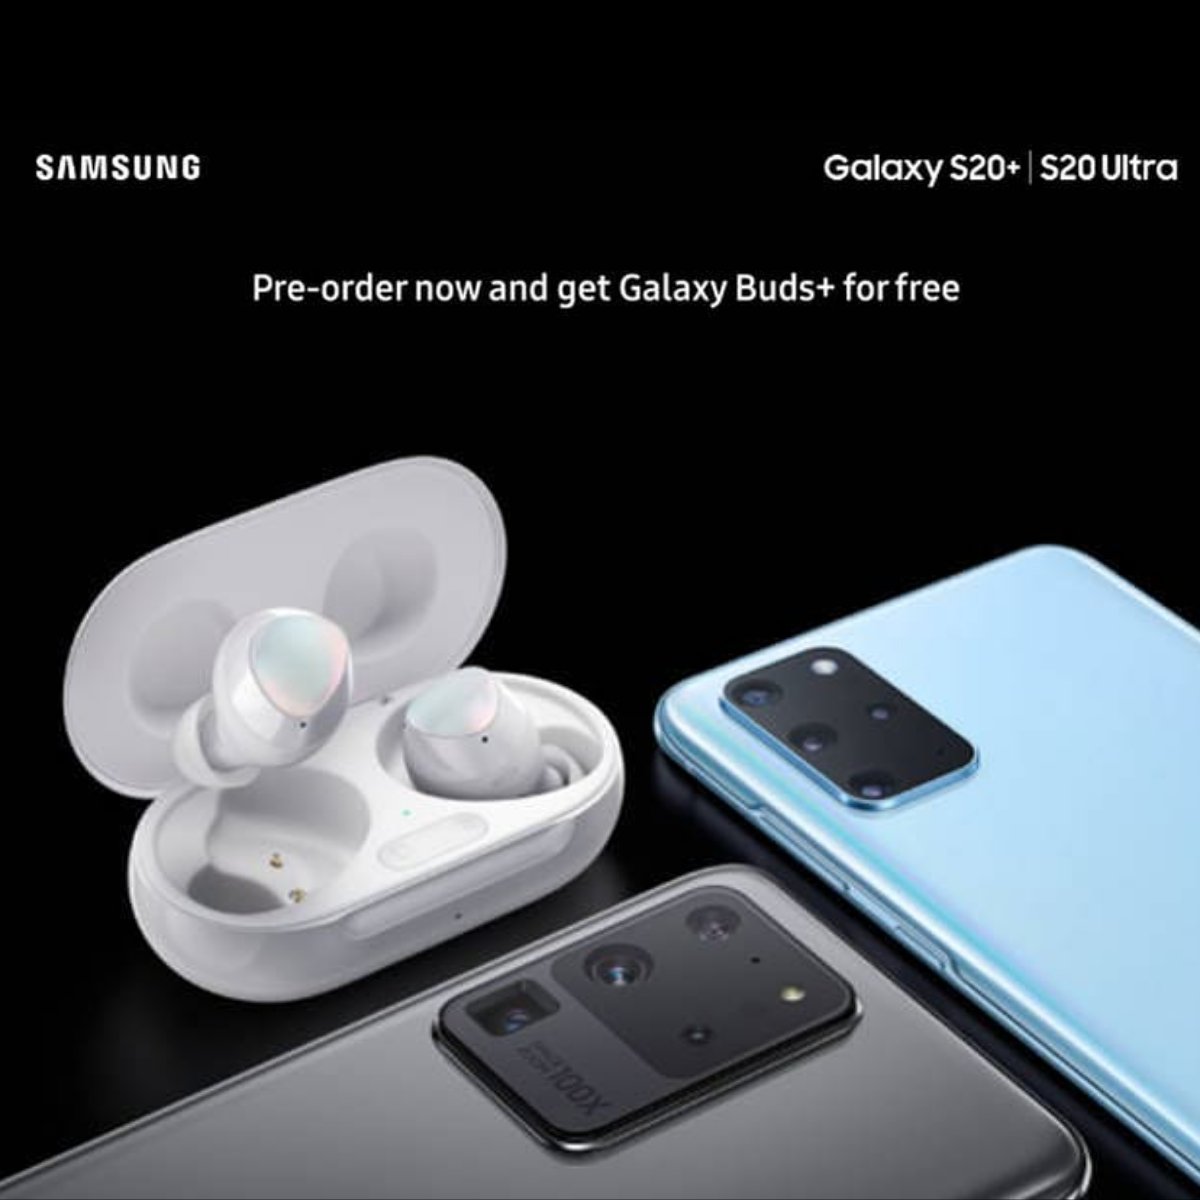 LEAKED Promo Advertisement 😍😱
Cc @universeice #Samsung #GalaxyS11 #Galaxys20plus 📱